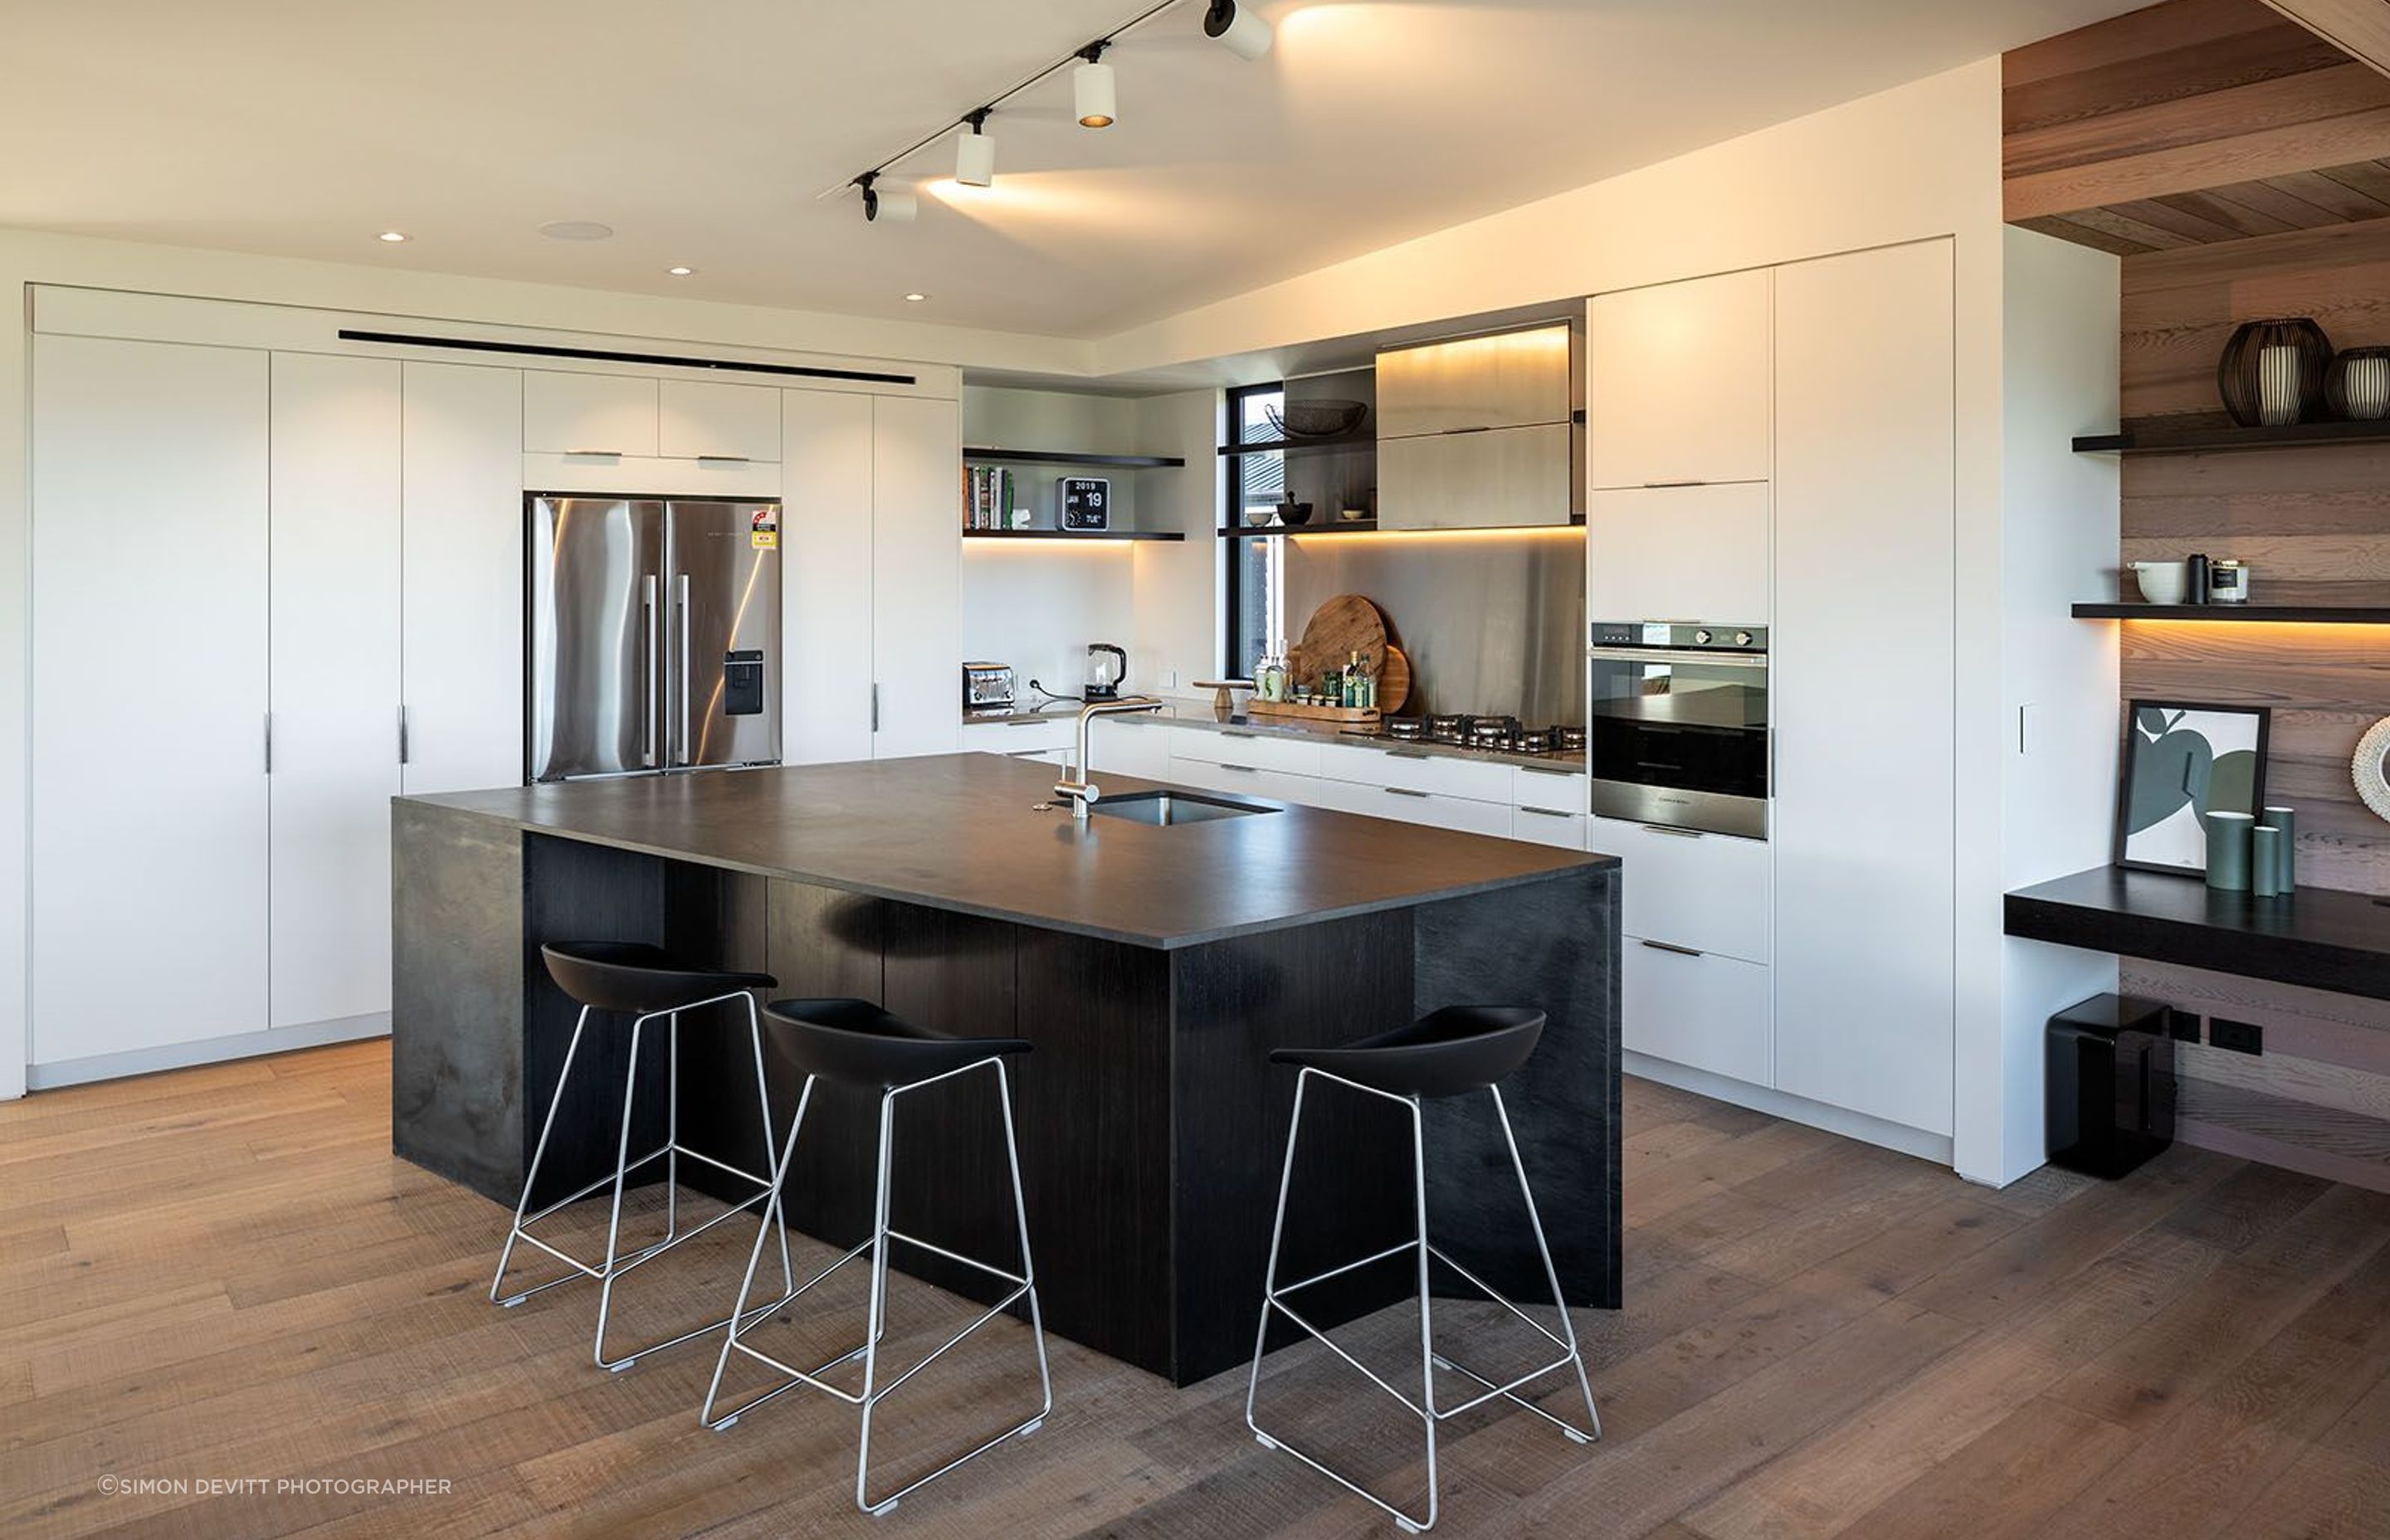 A large black island in the kitchen is a sculptural form that mimics the shape of the building.